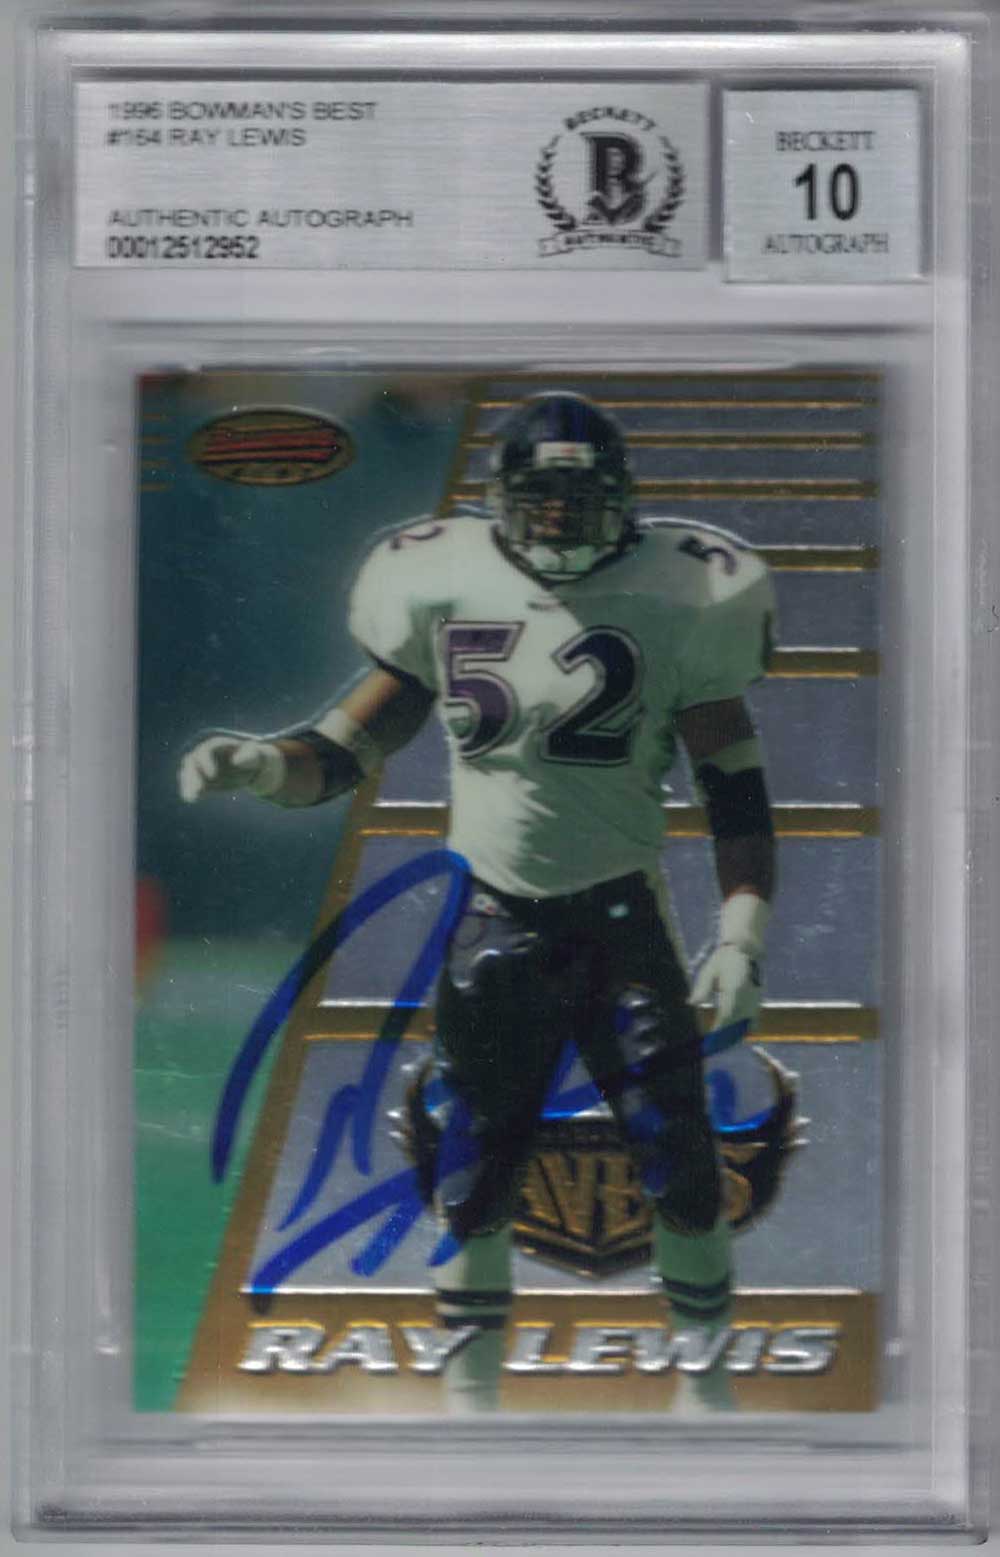 Ray Lewis Autographed Ravens 1996 Bowman's Best Trading Card BAS 10 Slab 29579